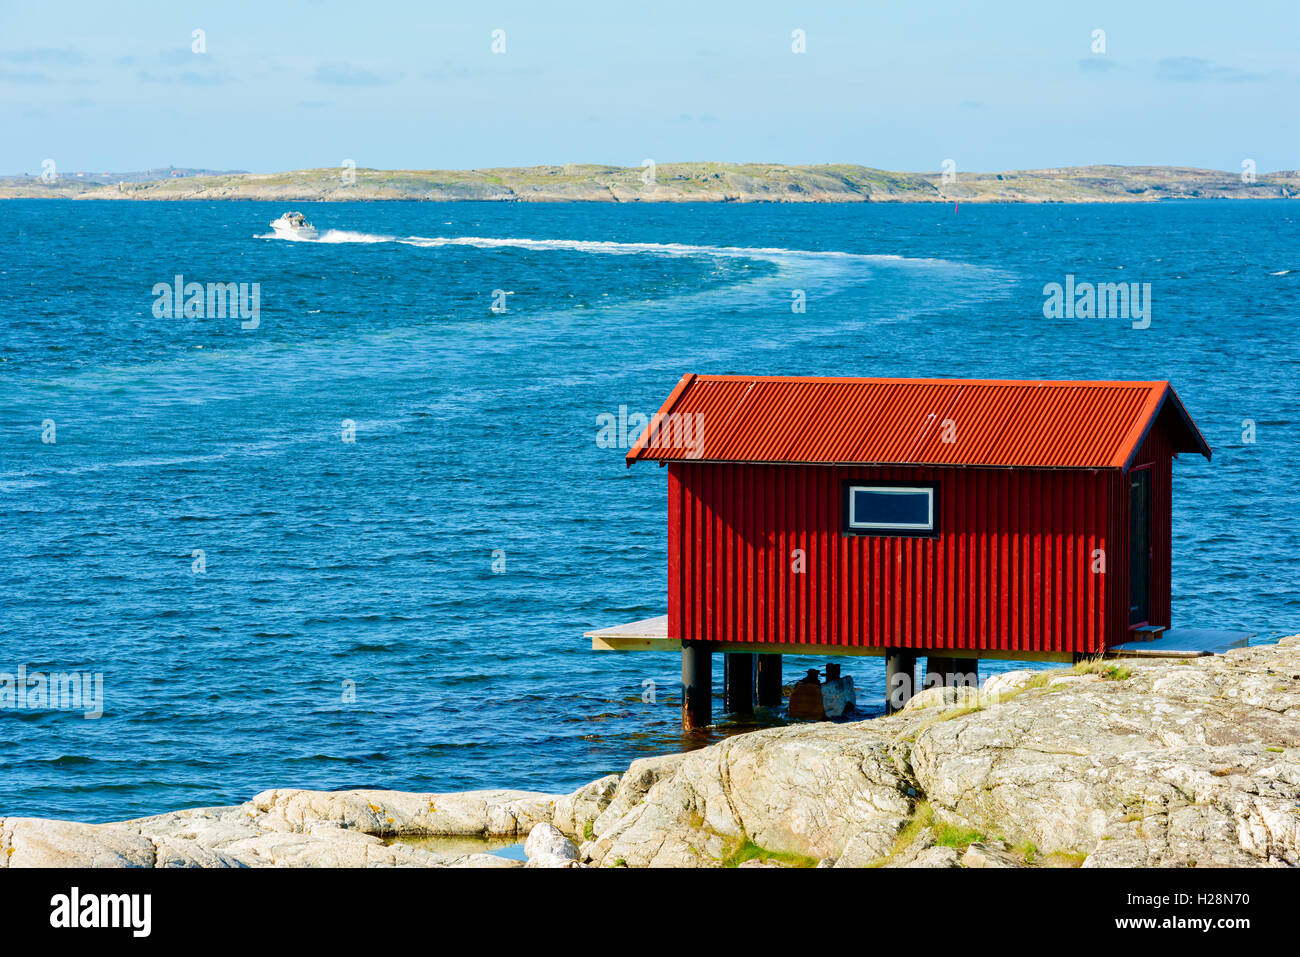 Mollosund, Sweden - September 9, 2016: Environmental documentary of red boathouse on stilts with motorboat making a turn in the Stock Photo